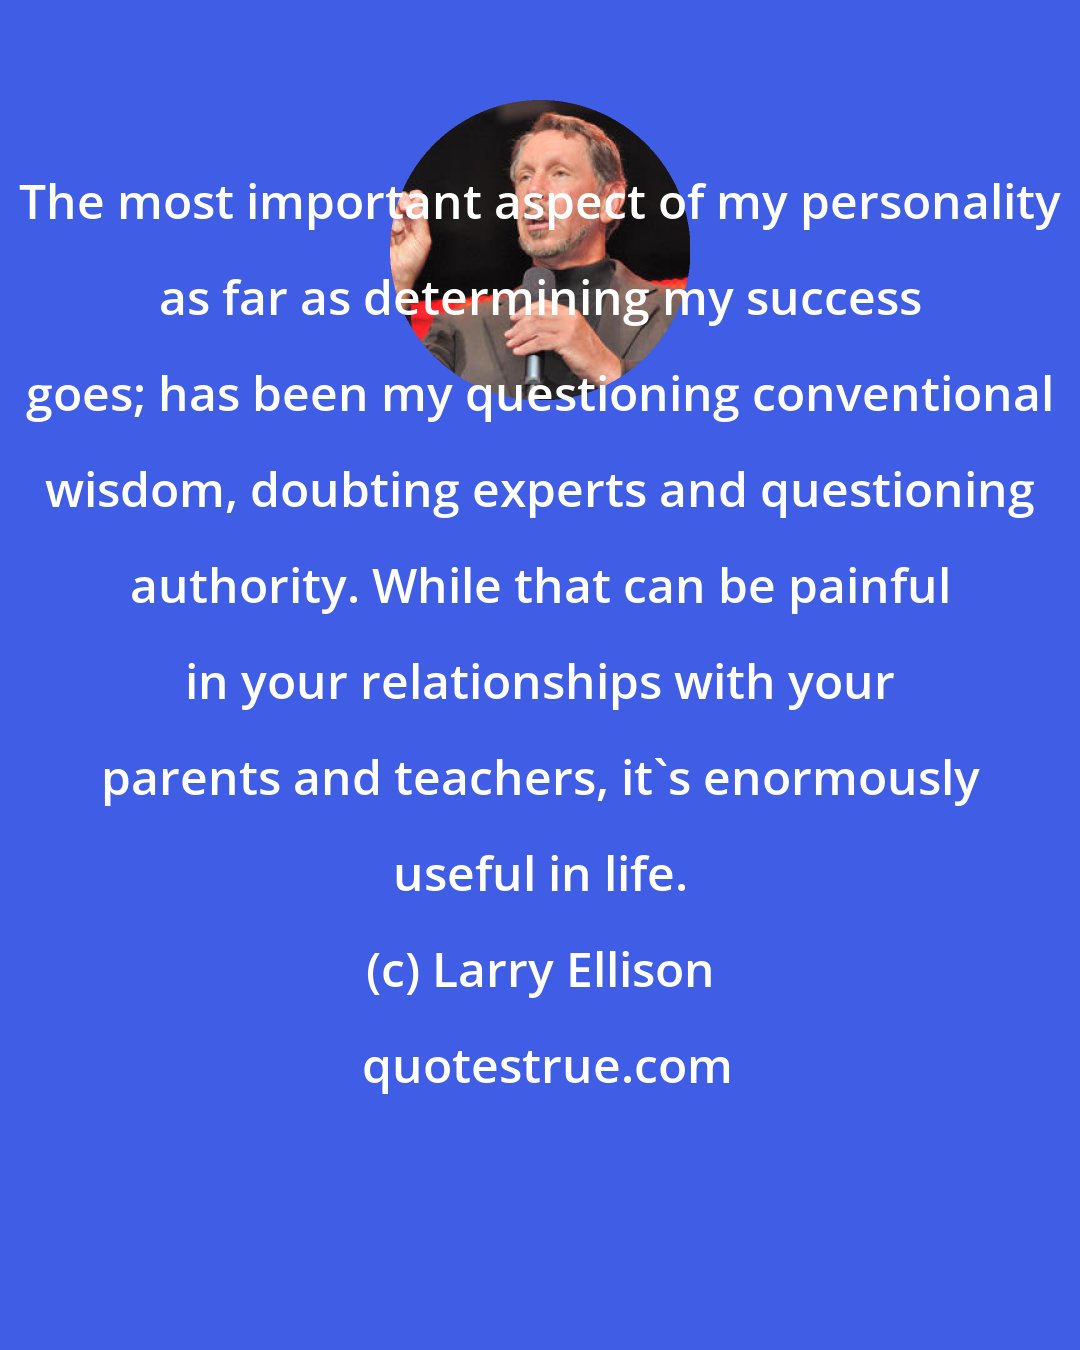 Larry Ellison: The most important aspect of my personality as far as determining my success goes; has been my questioning conventional wisdom, doubting experts and questioning authority. While that can be painful in your relationships with your parents and teachers, it's enormously useful in life.